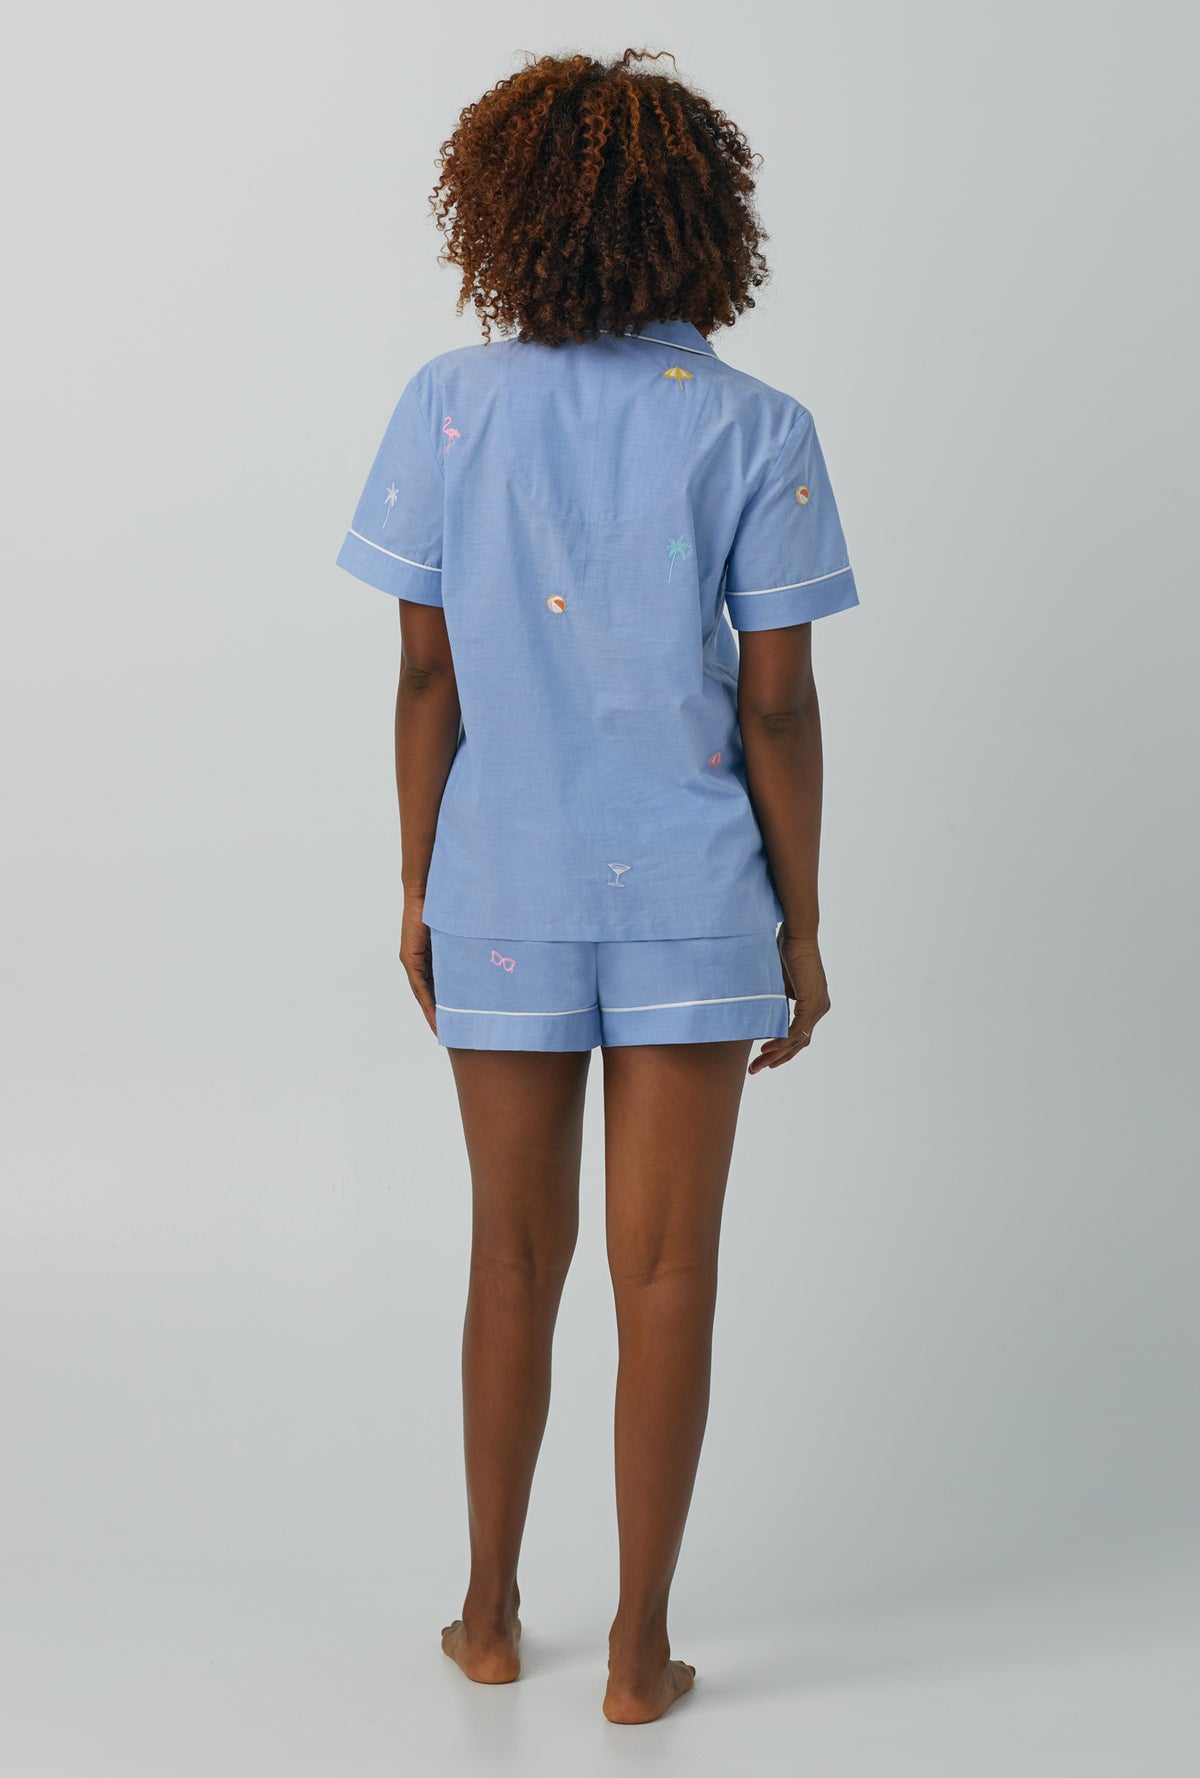 A lady wearing blue Short Sleeve Classic Woven Cotton Poplin Shorty PJ Set with Chambray print